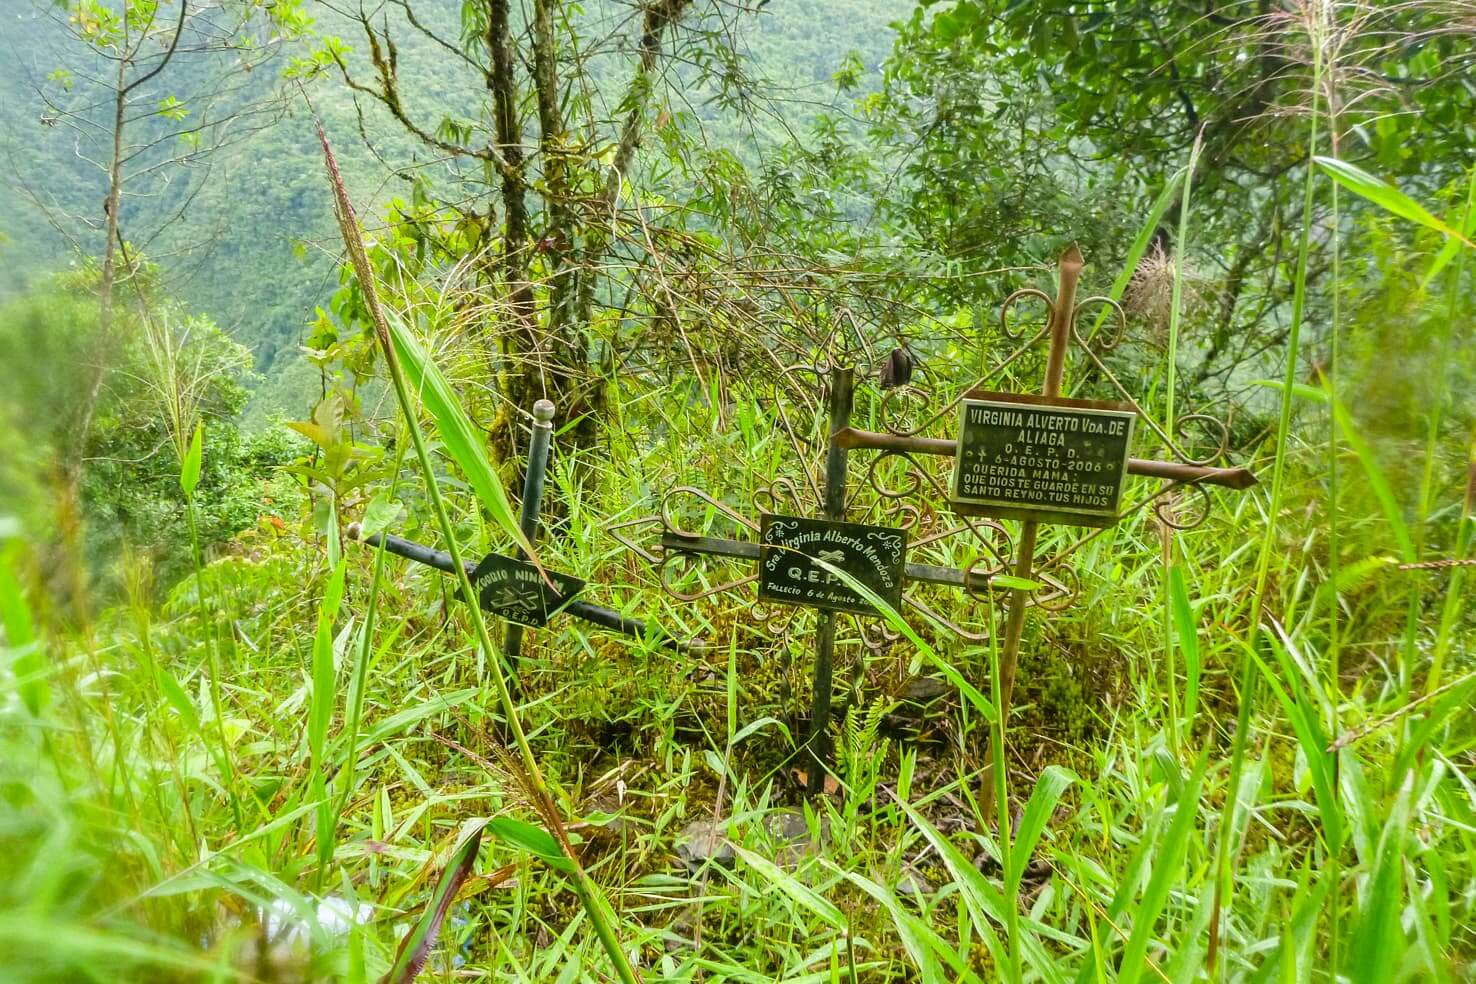 Biking Death Road, Bolivia - tourist attraction or the real deal